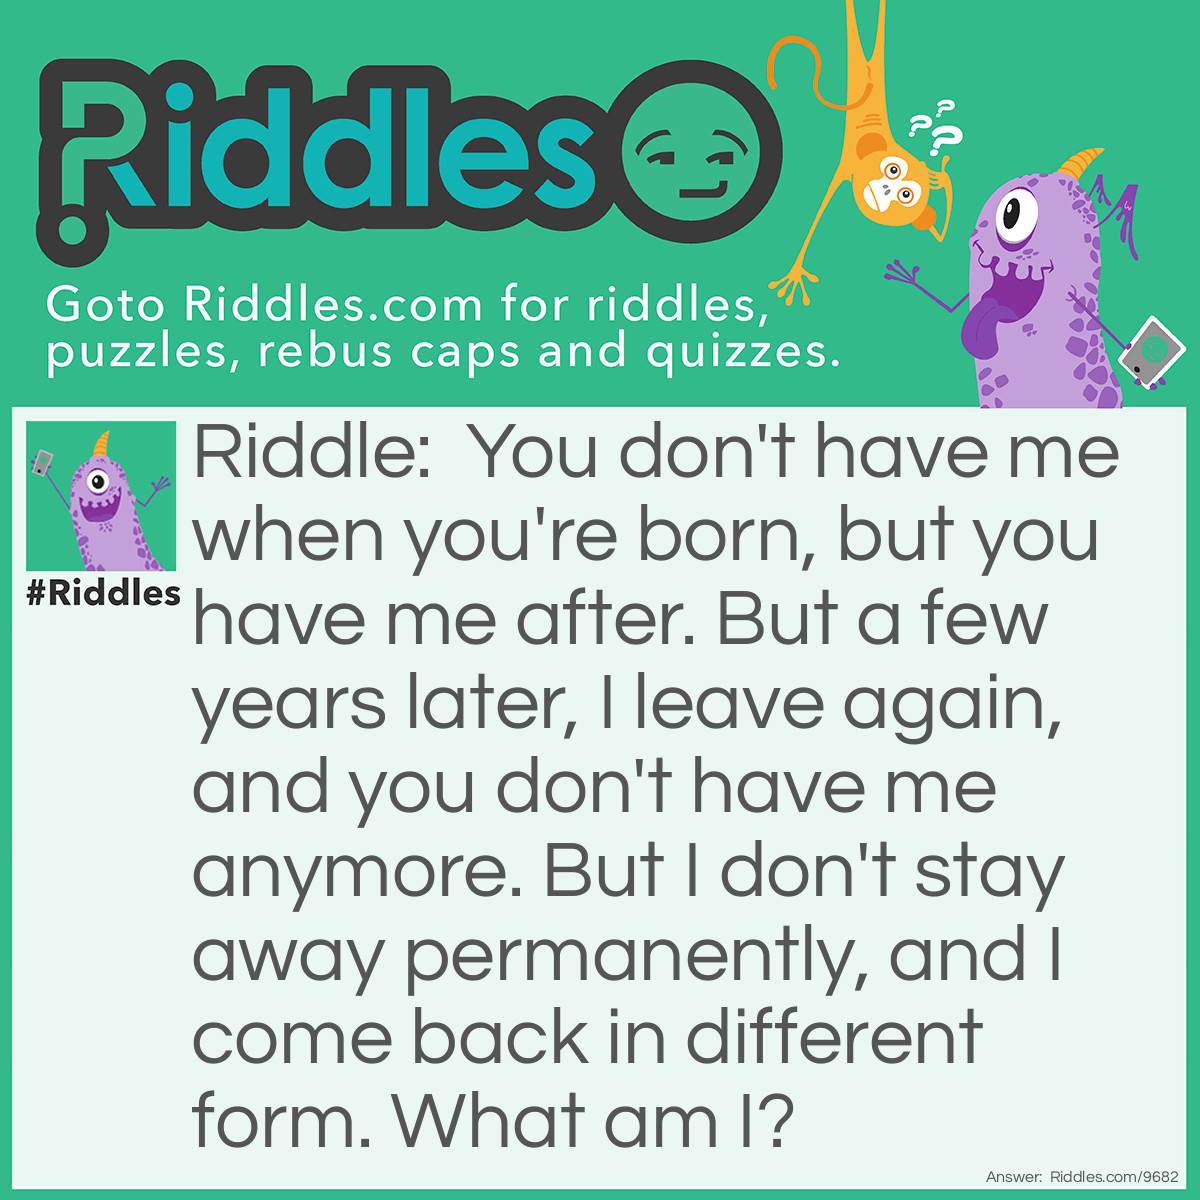 Riddle: You don't have me when you're born, but you have me after. But a few years later, I leave again, and you don't have me anymore. But I don't stay away permanently, and I come back in different form. What am I? Answer: Teeth.